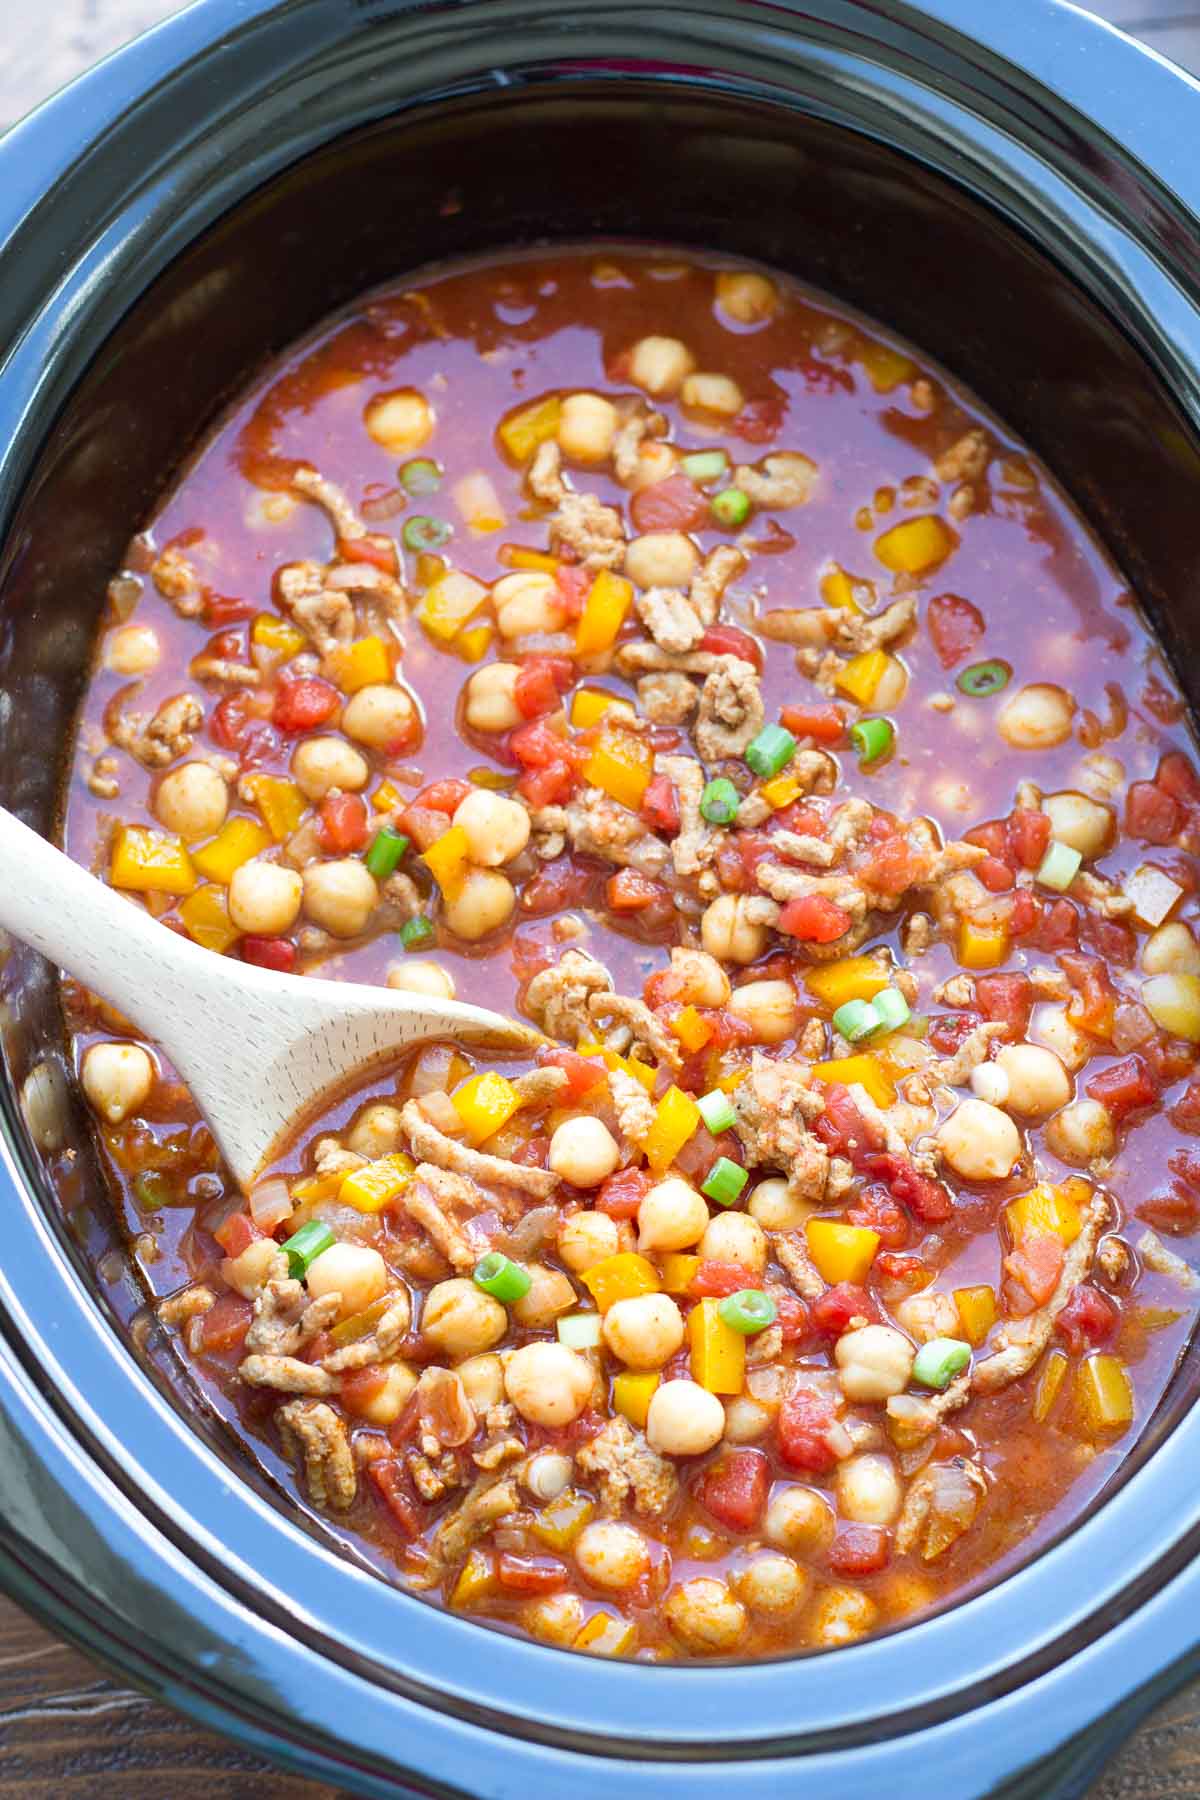 Turkey chickpea chili in slow cooker.